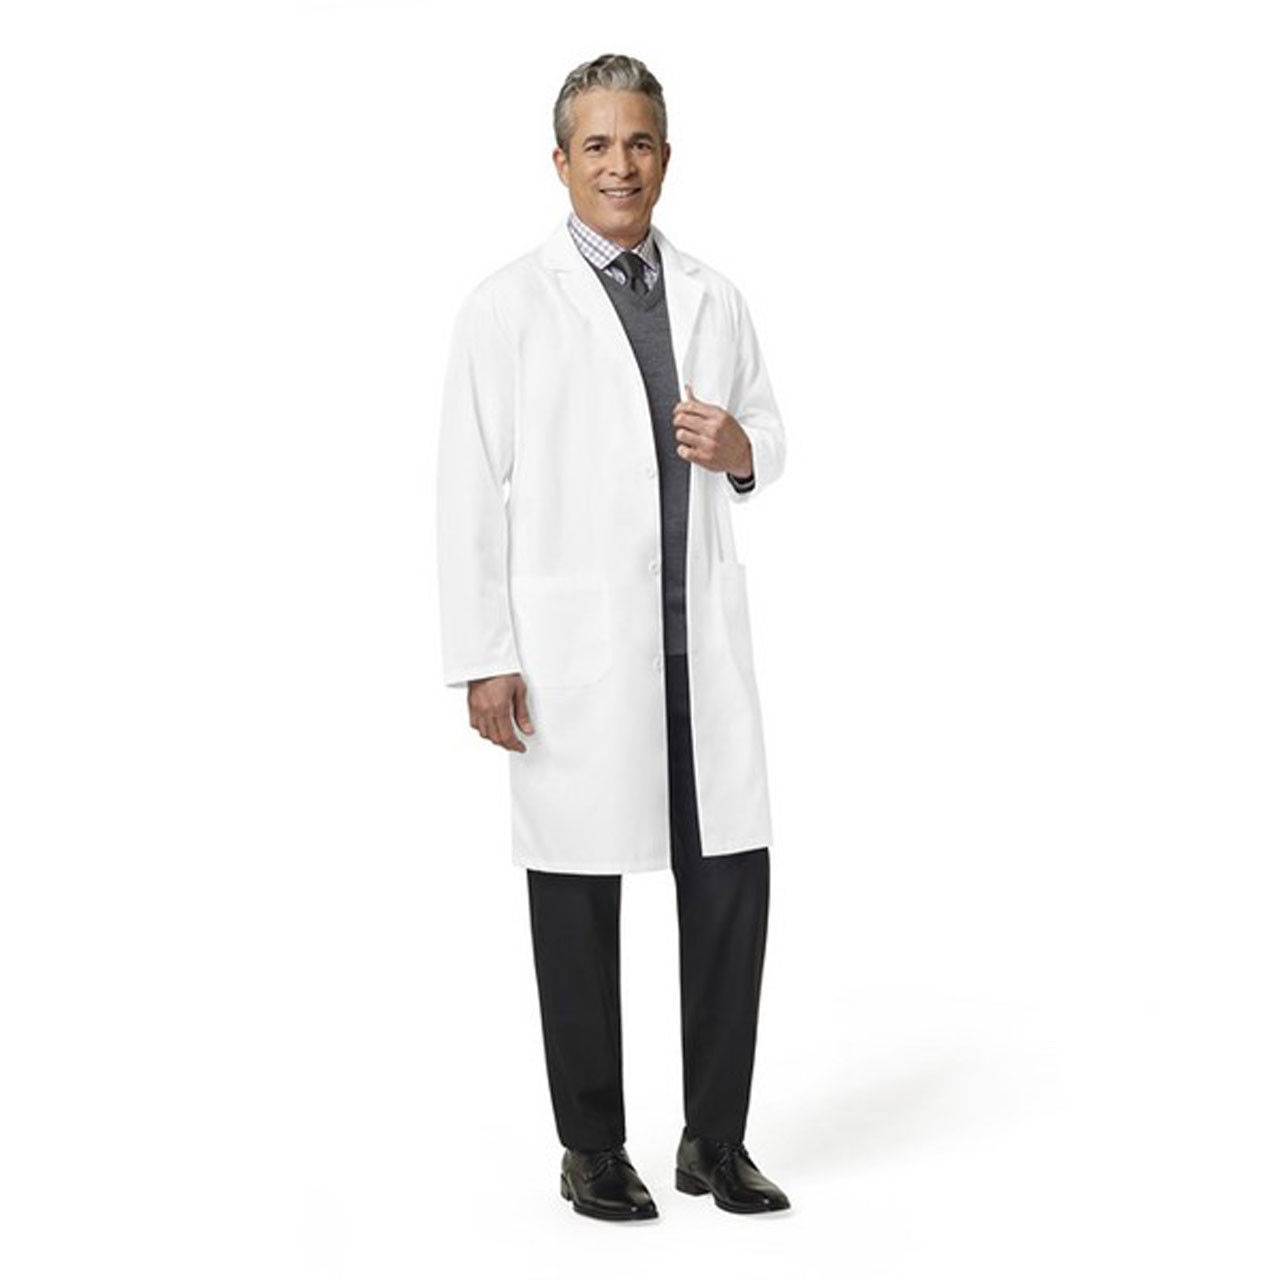 Lab Coats For Men 65 Polyester / 35 Cotton Knee Length 41" - Bulk Case Of 30 Questions & Answers